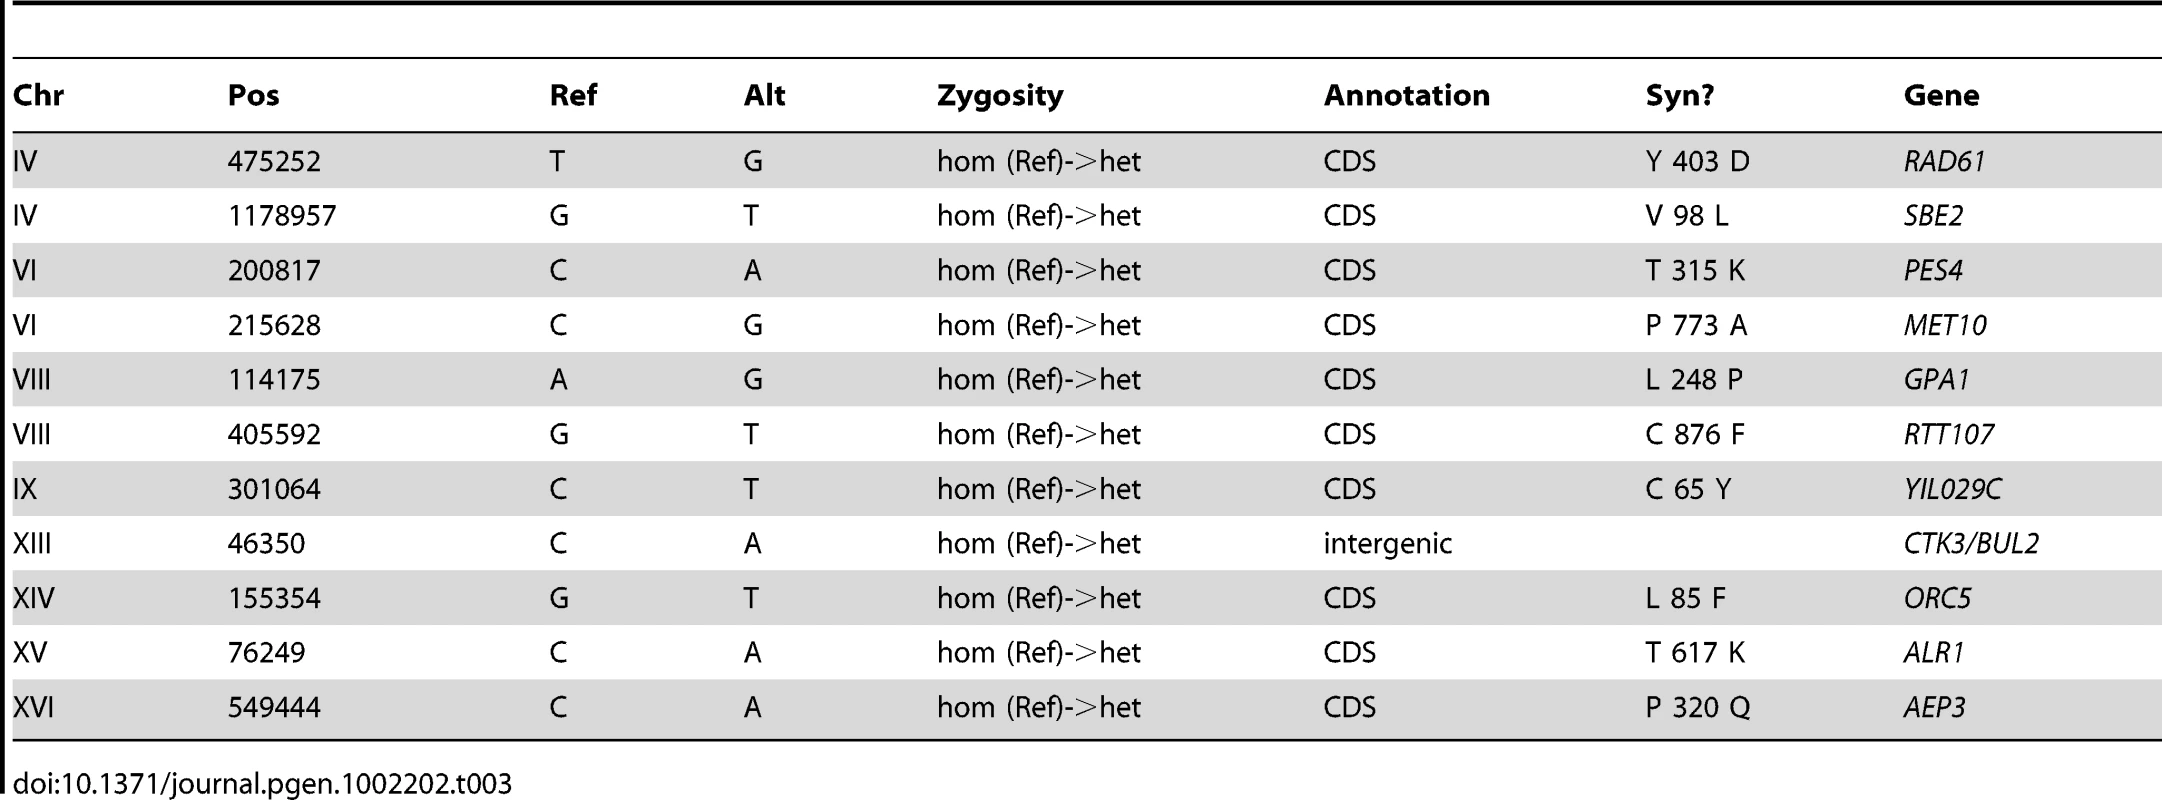 Summary of Substitutions and Indels for E3 (250 generations).